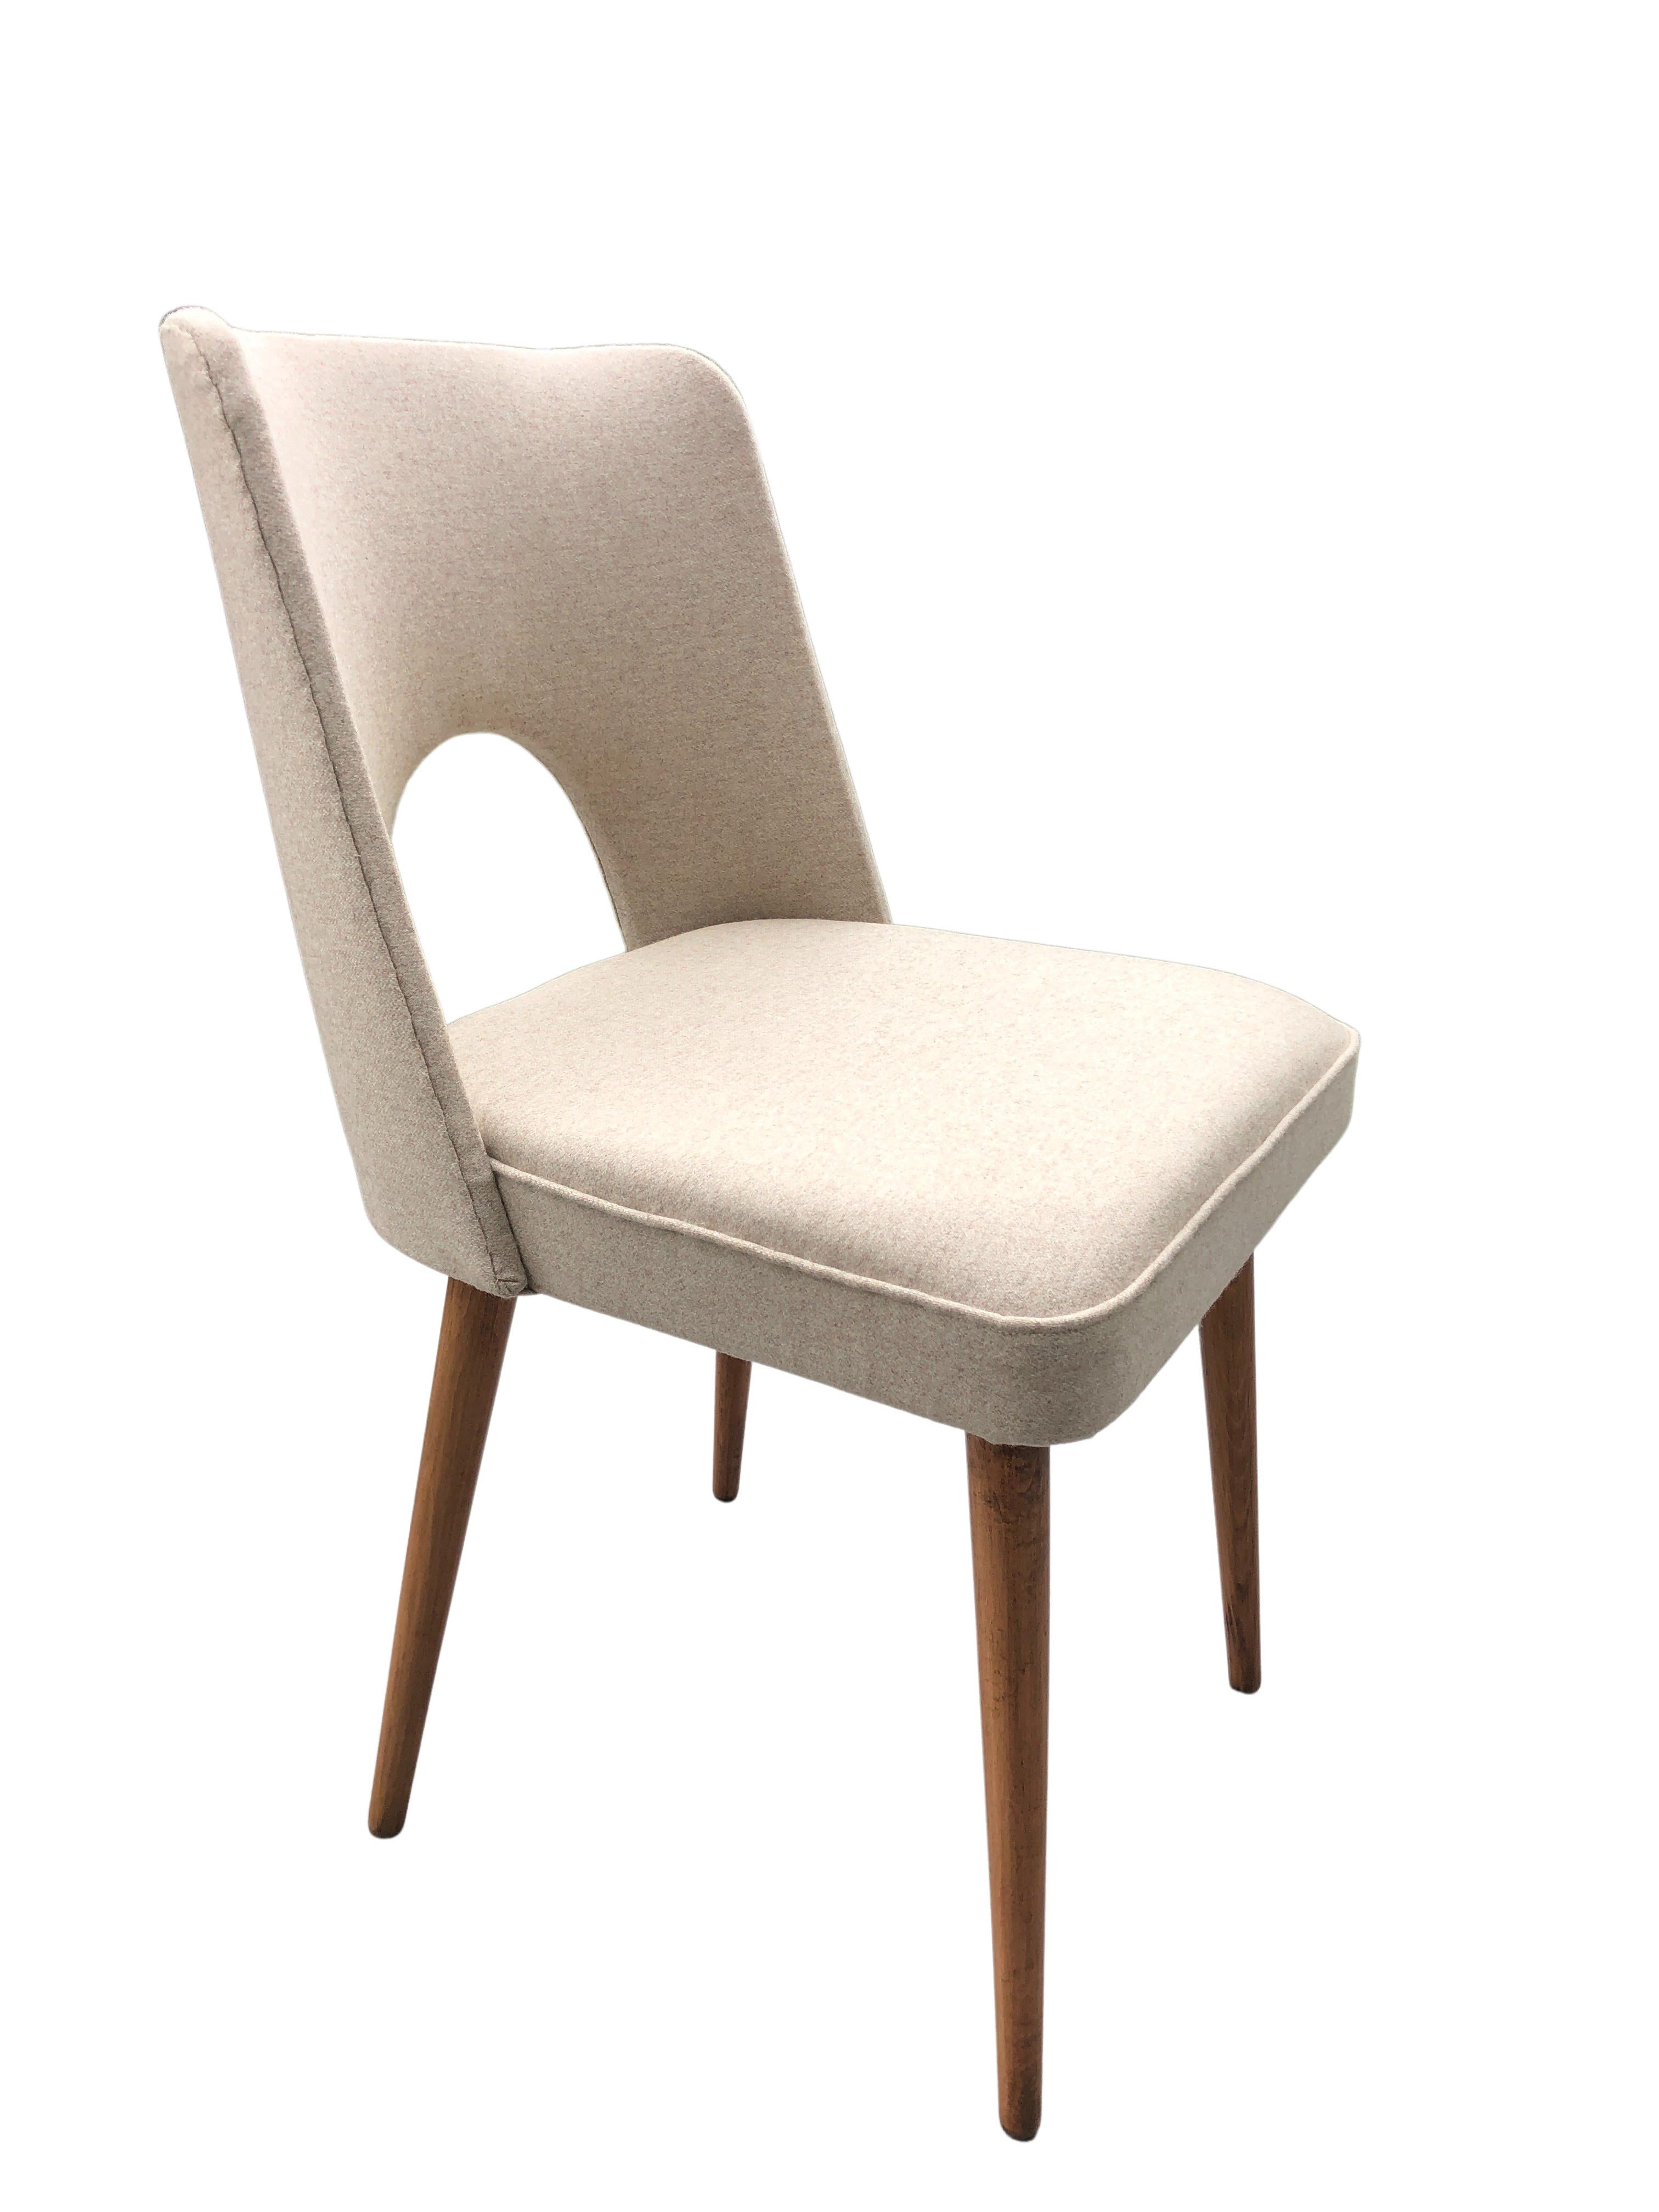 Beautiful set of 6 dining chairs with a modernist silhouette, design around 1962, manufactured by Slupskie Fabryki Mebli in Poland. The structure is made of plywood and beech wood. The upholstery is made of a high quality wool in beige color. The